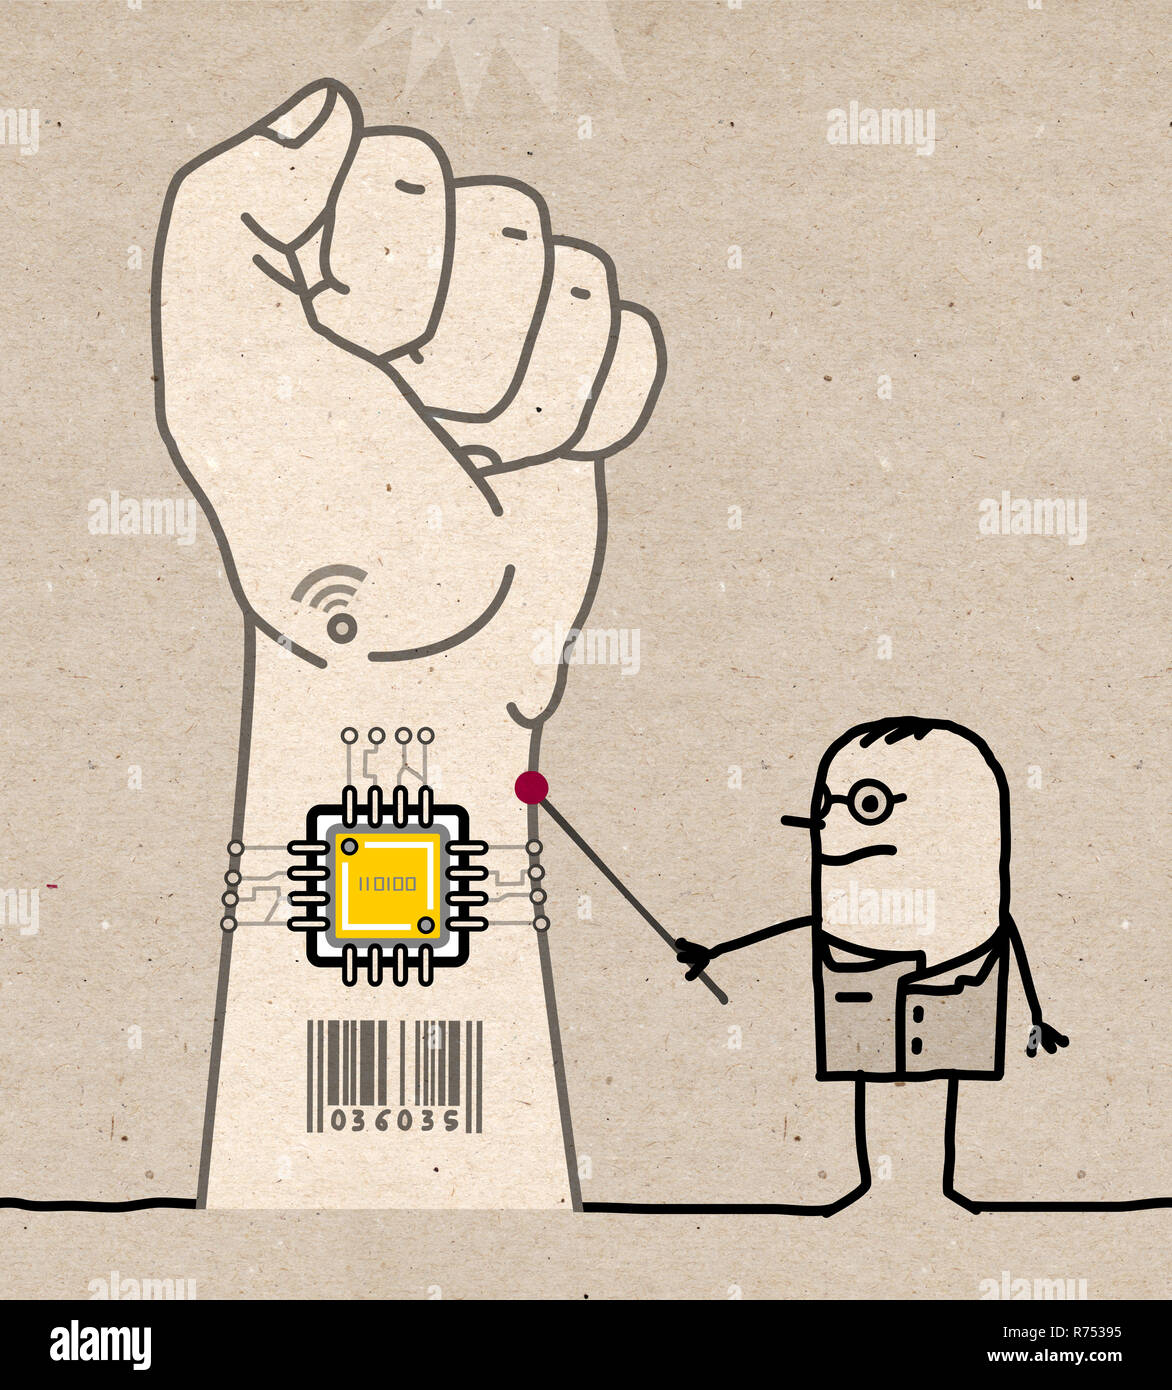 Cartoon Doctor Showing A Microchip Implant in Wrist- illustration on textured brown paper Stock Photo